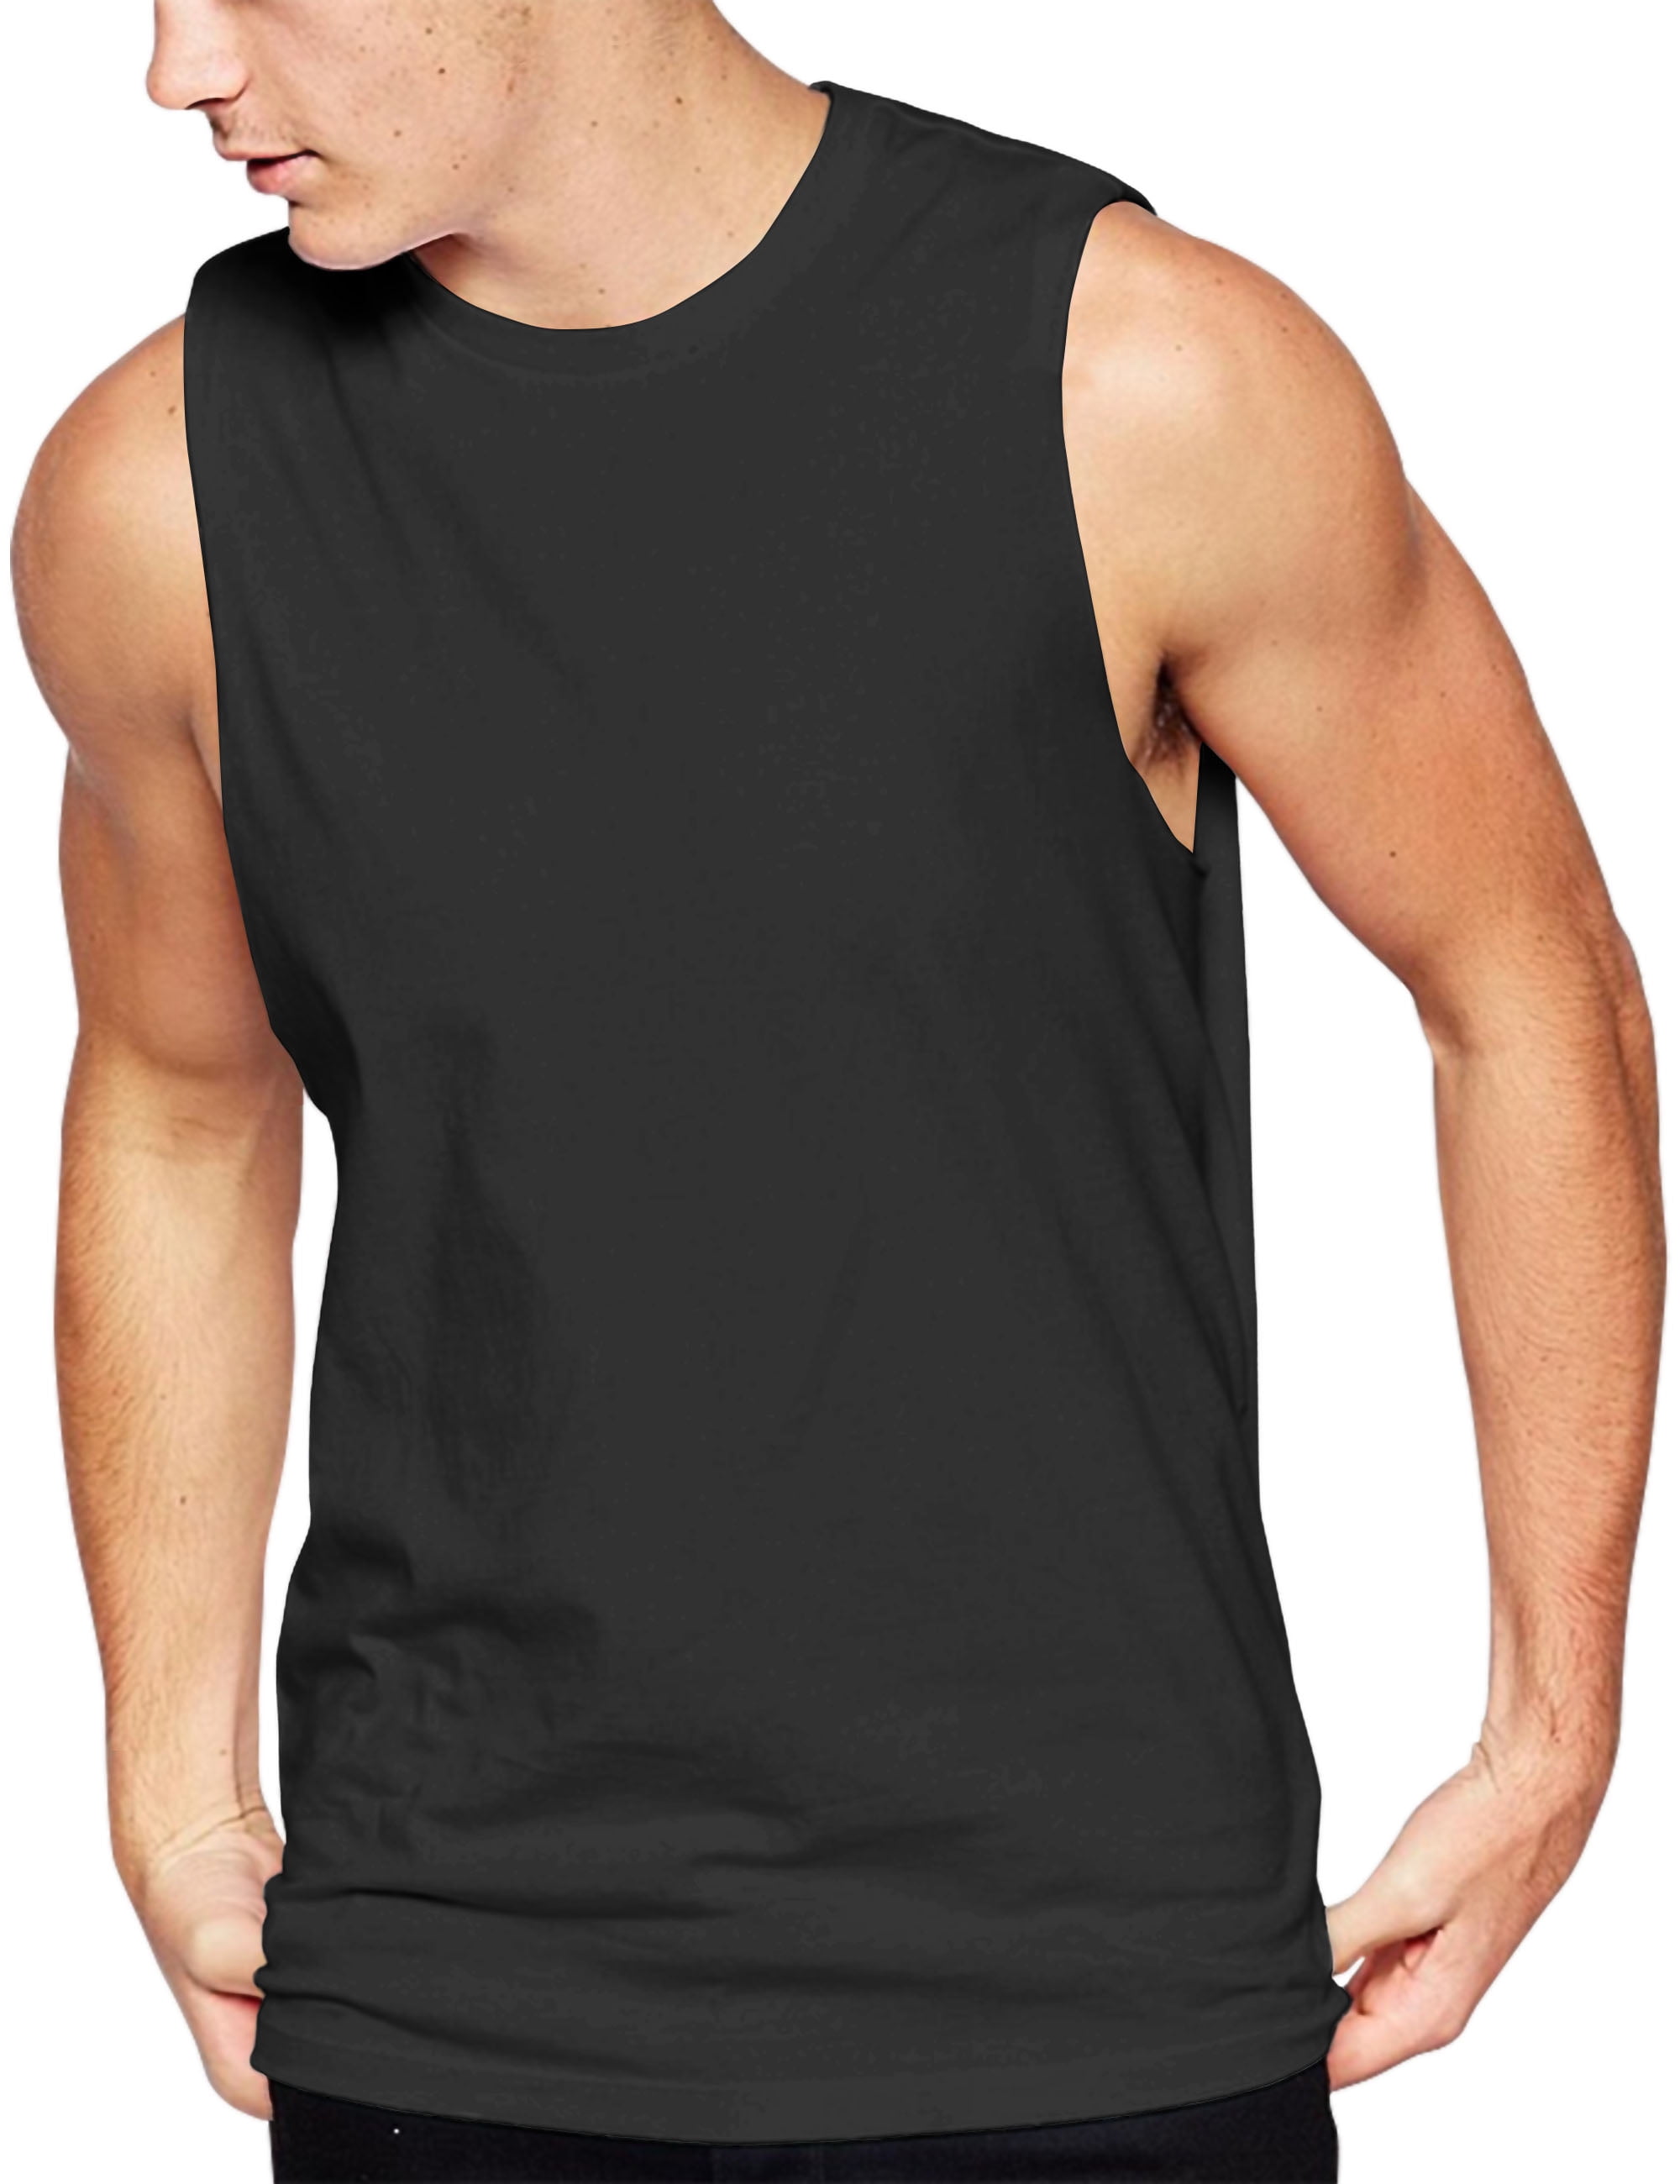 Hat and Beyond Mens Two Tone Sleeveless Tank Top Basic Lightweight Workout Muscle Tee 